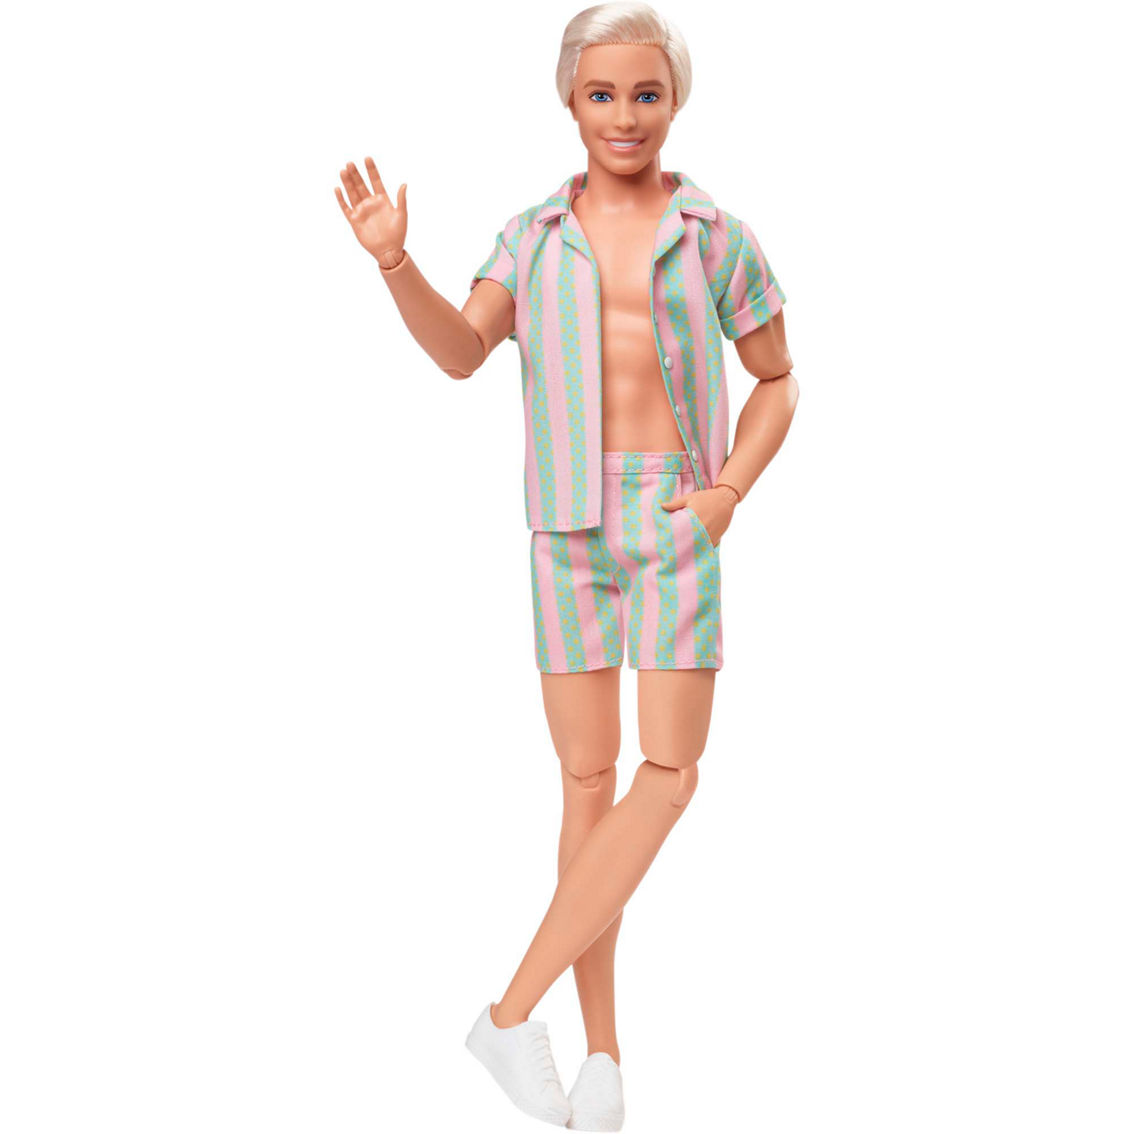  Barbie It Takes Two Ken Camping Doll Wearing Plaid Shirt, Jeans  and White Sneakers, with Camping Accessories, Toy for 3 Year Olds & Up :  Toys & Games